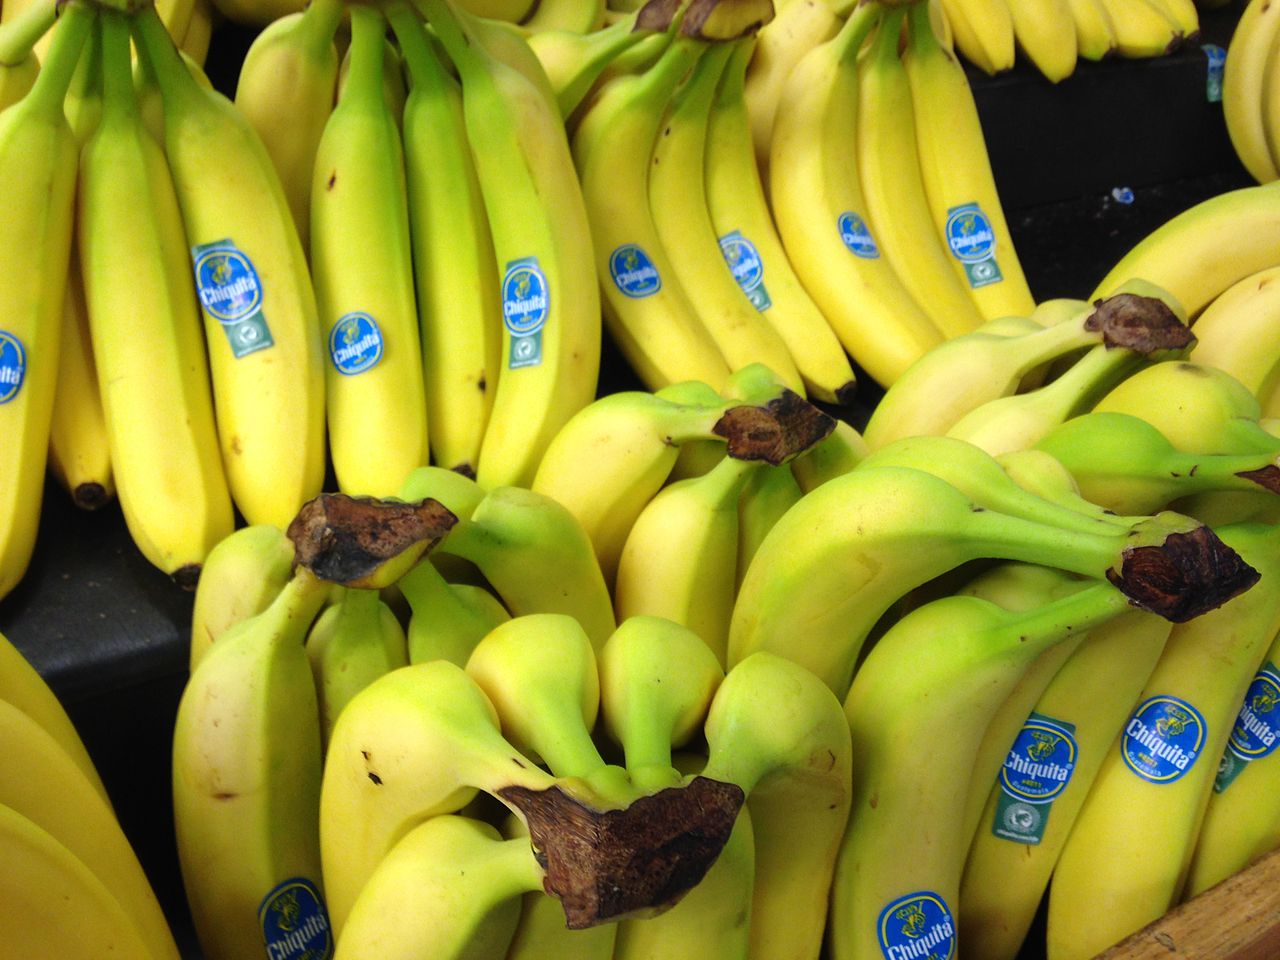 US court finds banana giant Chiquita liable for financing Colombian paramilitaries